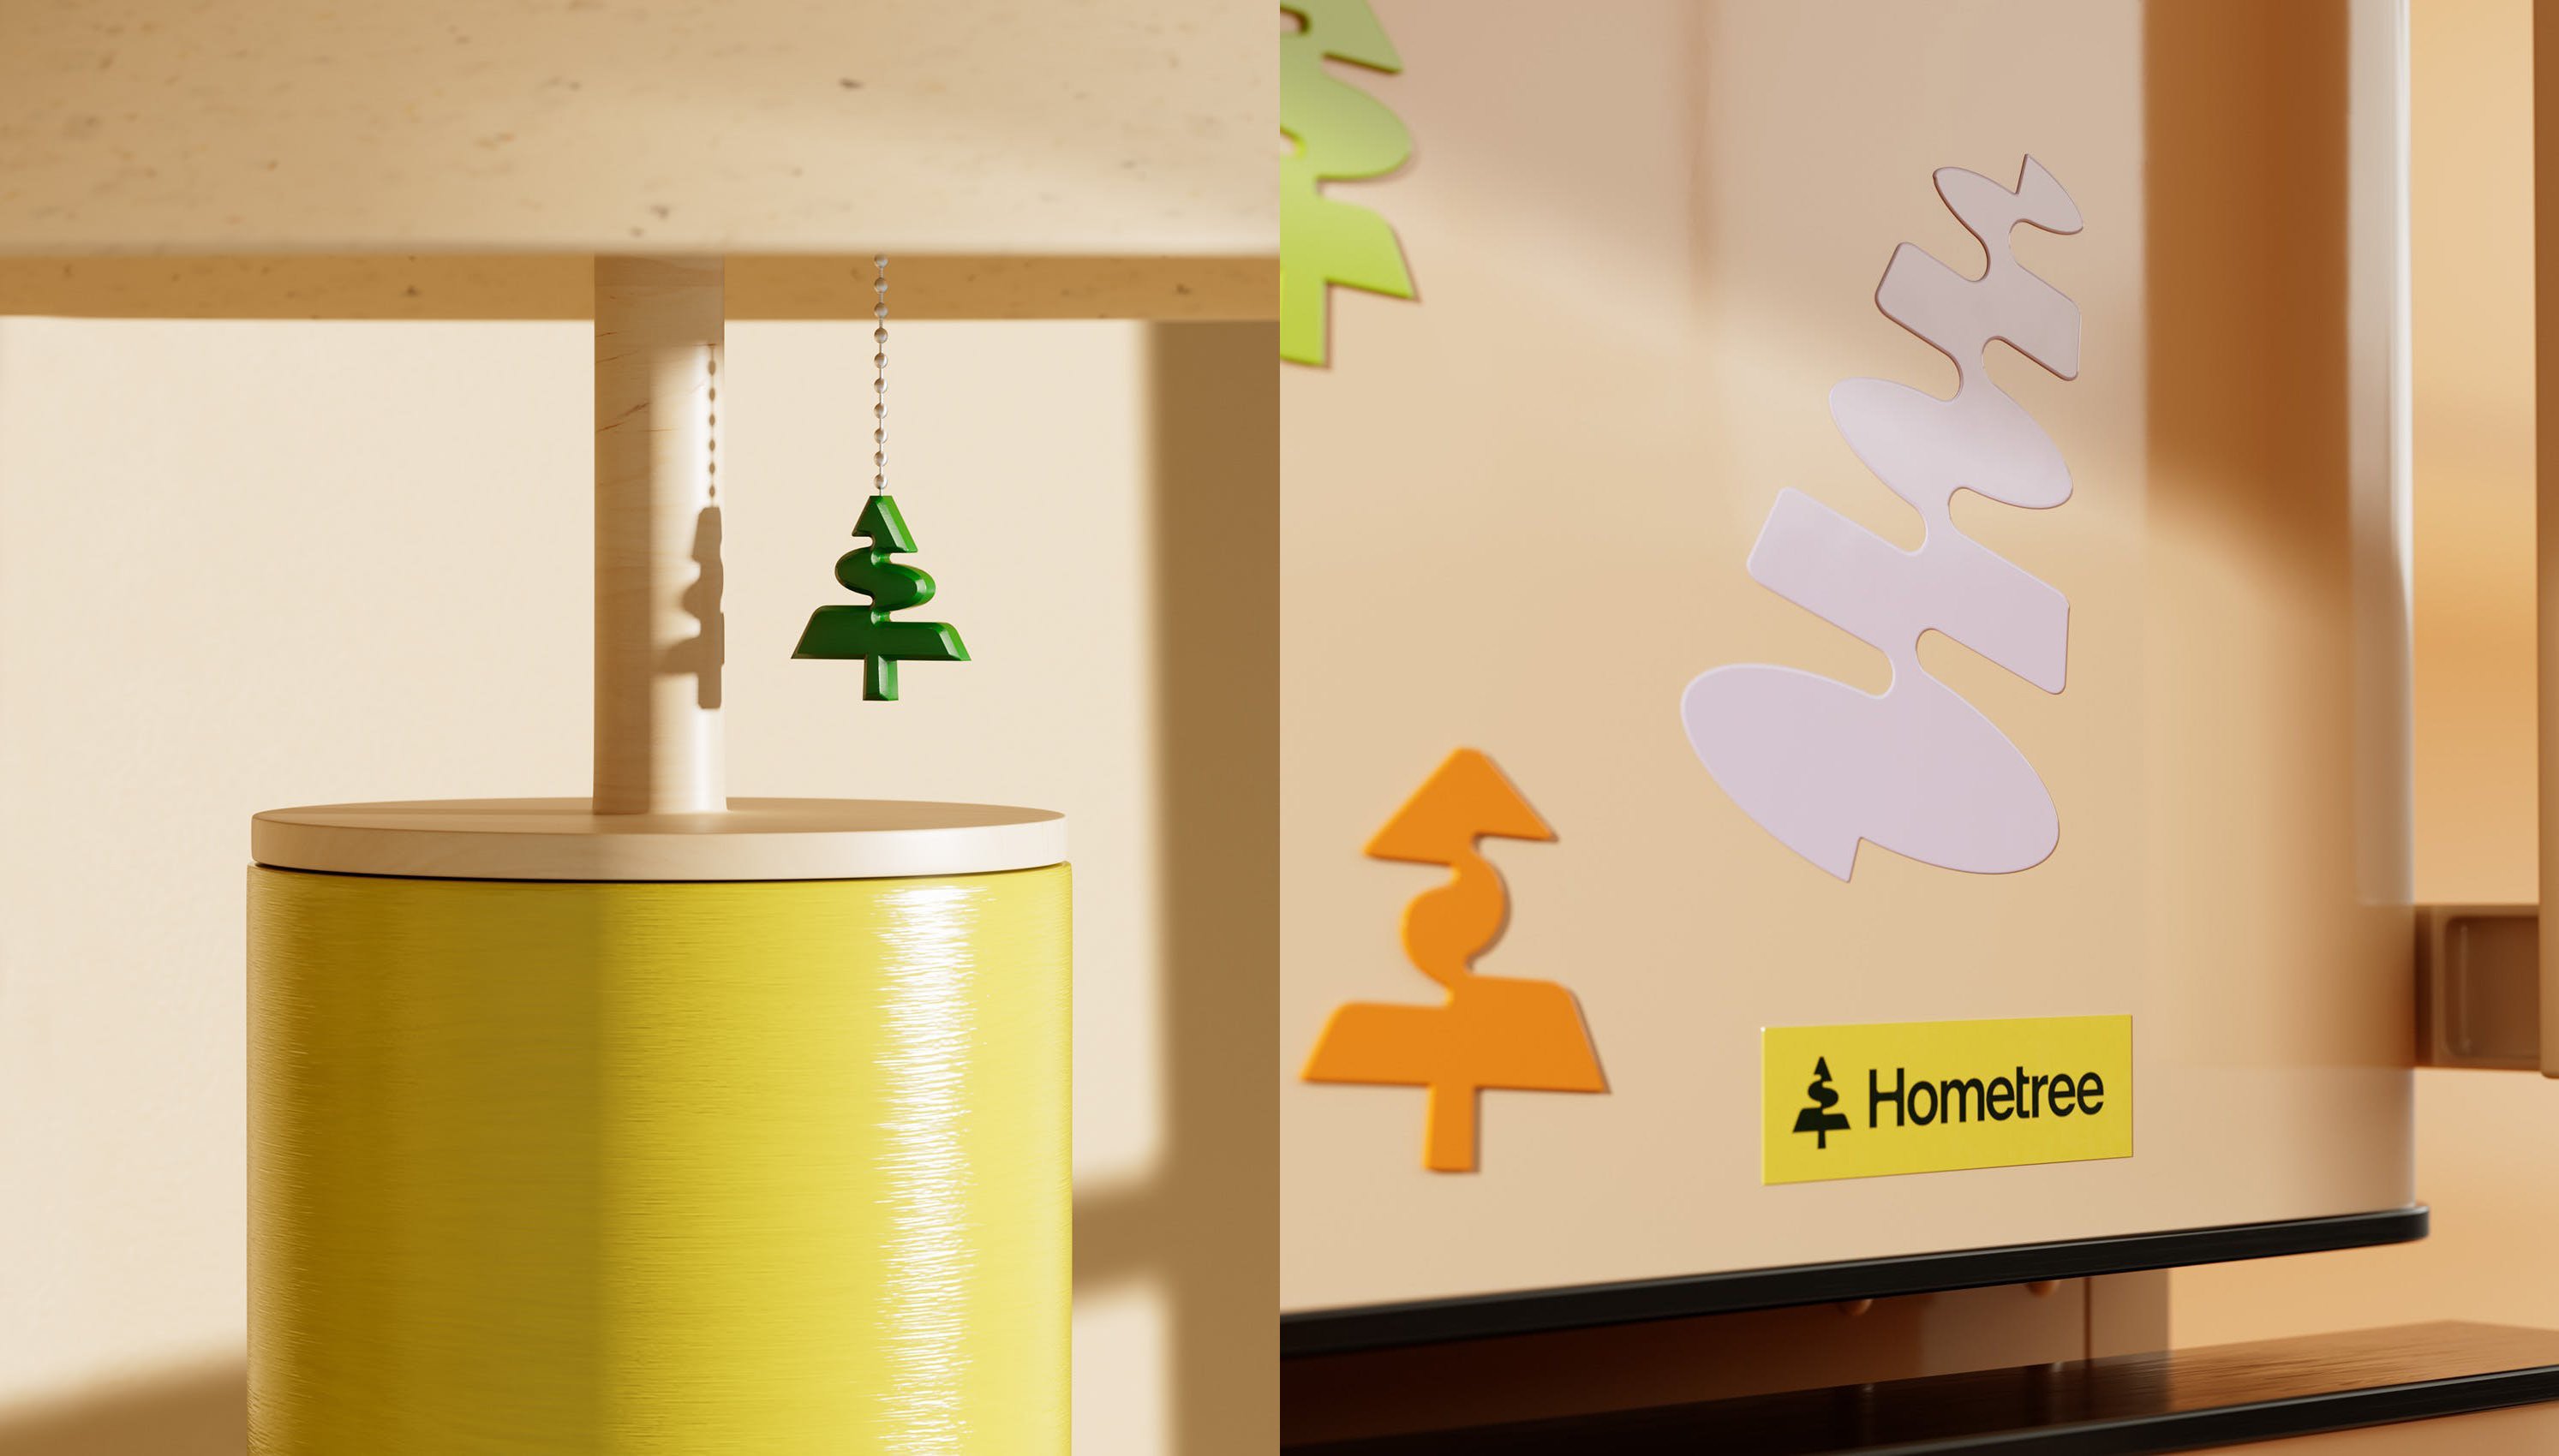 New animated logo and visual identity for UK-based low-carbon home energy hardware company Hometree designed by How&How